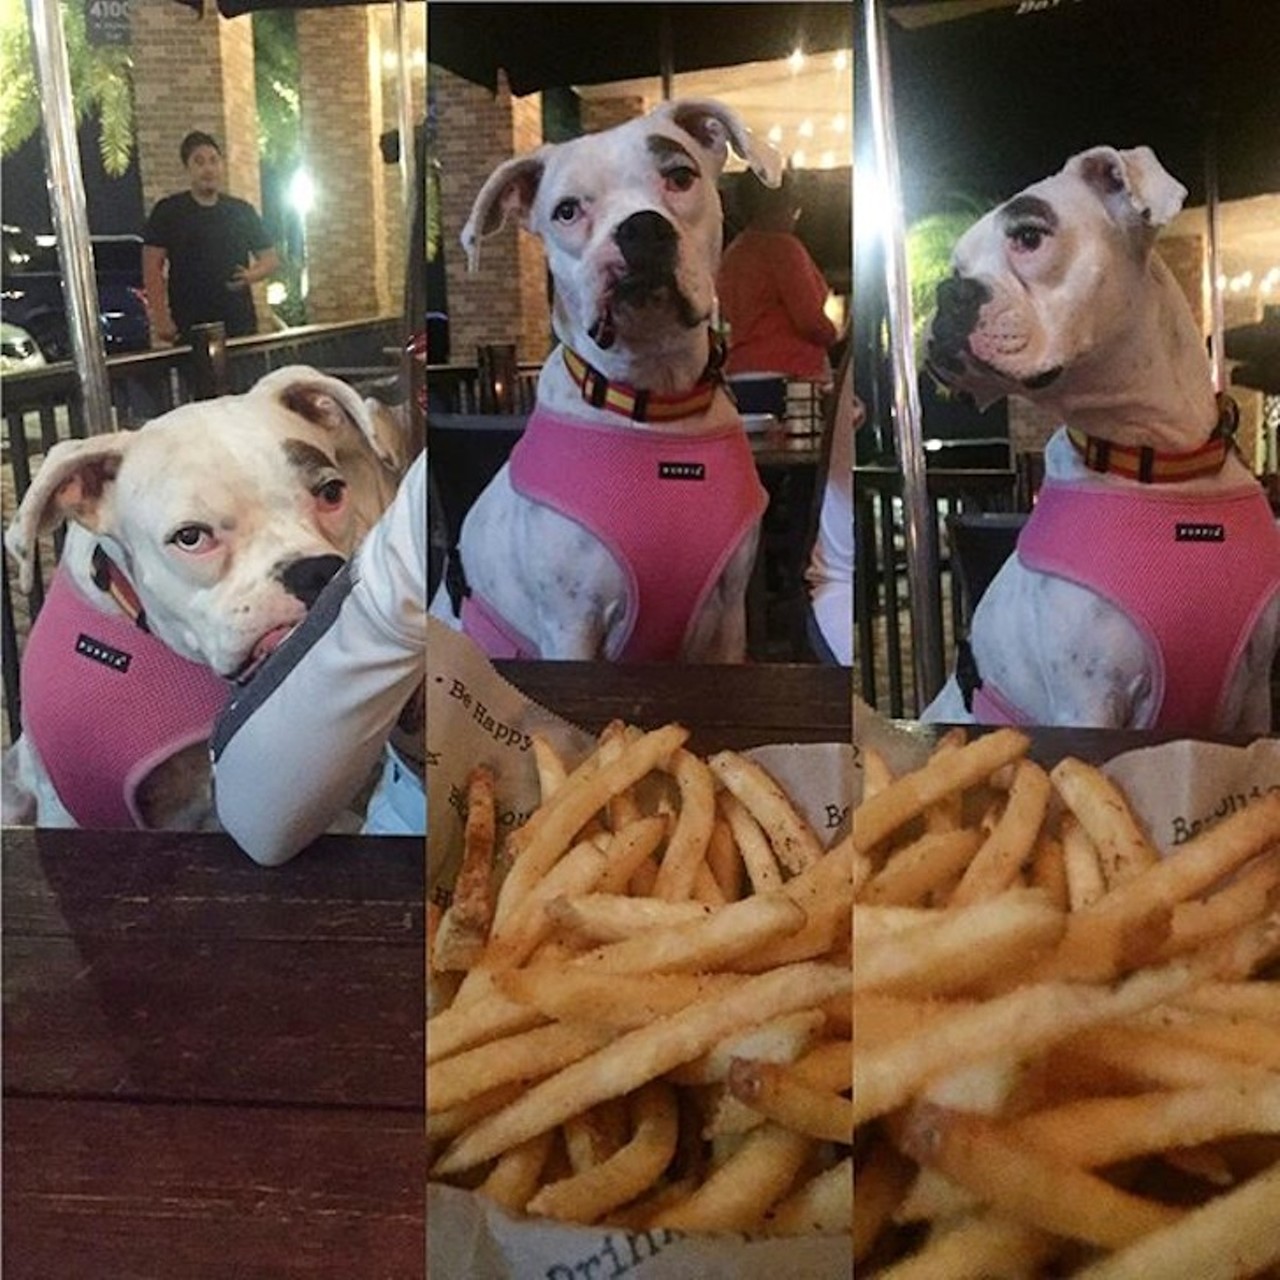 Bar Louie
4100 N Alafaya Trail | 407-428-2980
There&#146;s no better way to put the &#147;happy&#148; in happy hour than a cozy night spent lounging outside with your best friend and a cheap cocktail. Tails will be wagging, guaranteed. 
Photo via Lenna_the_boxer/Instagram